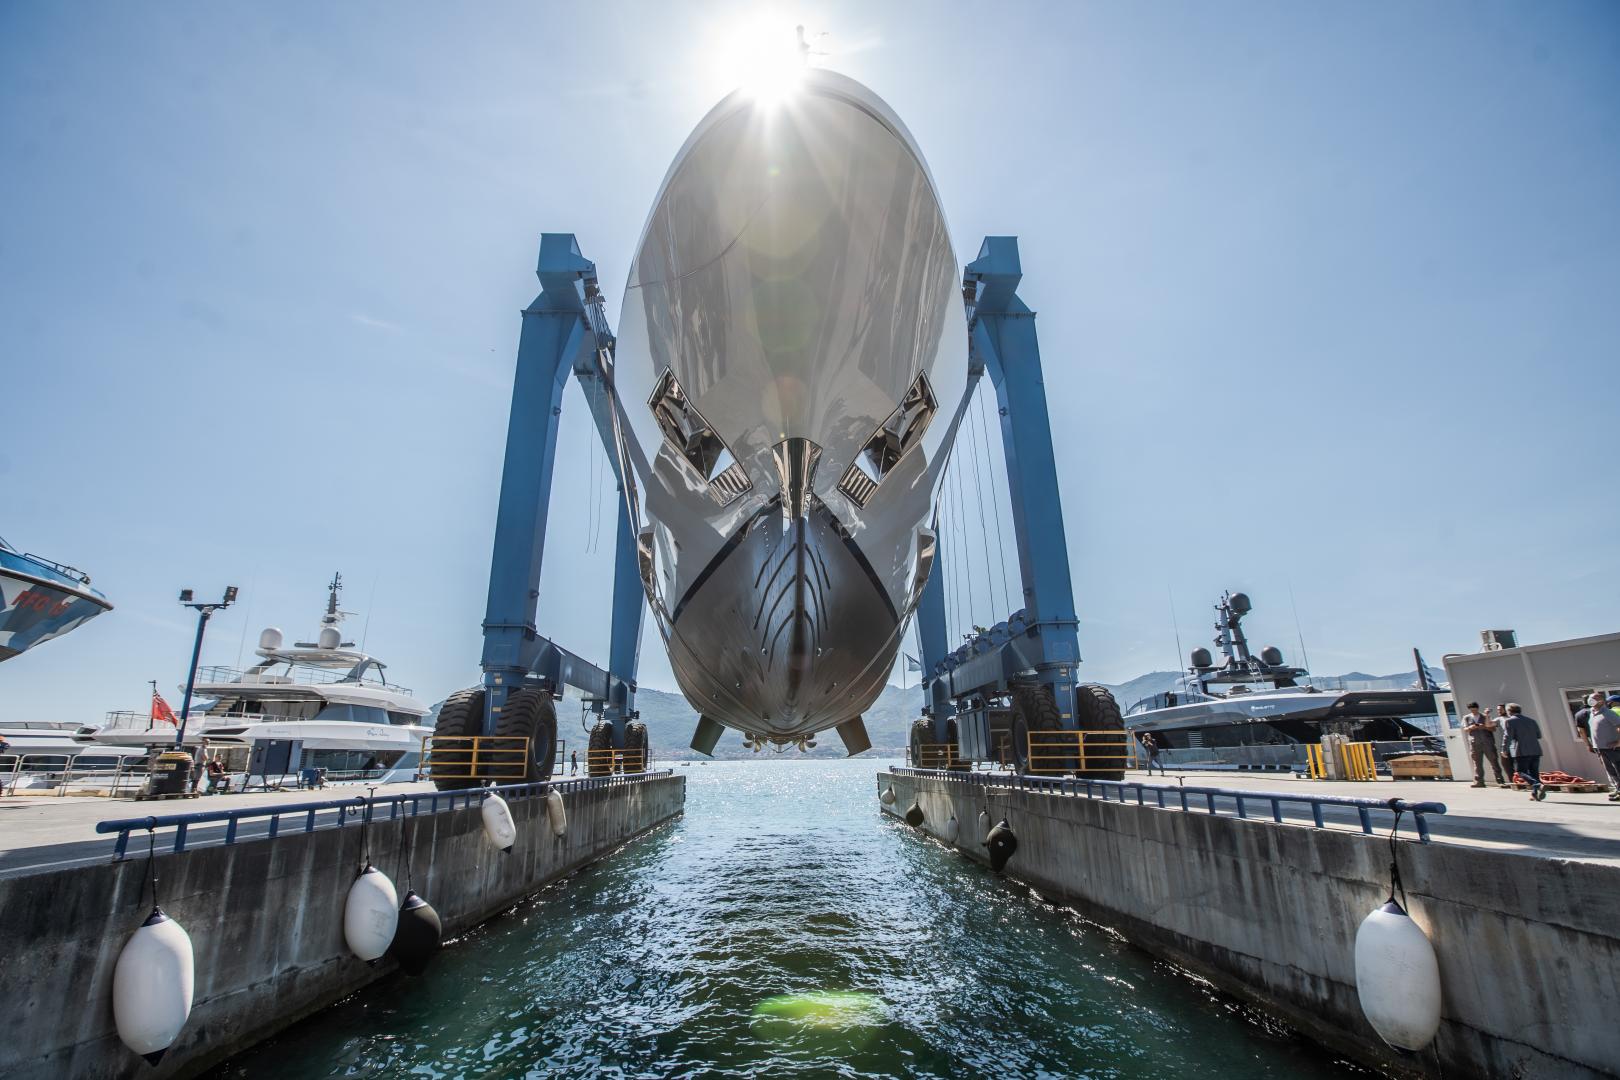 Baglietto is proud to announce the launch of motor yacht Lion